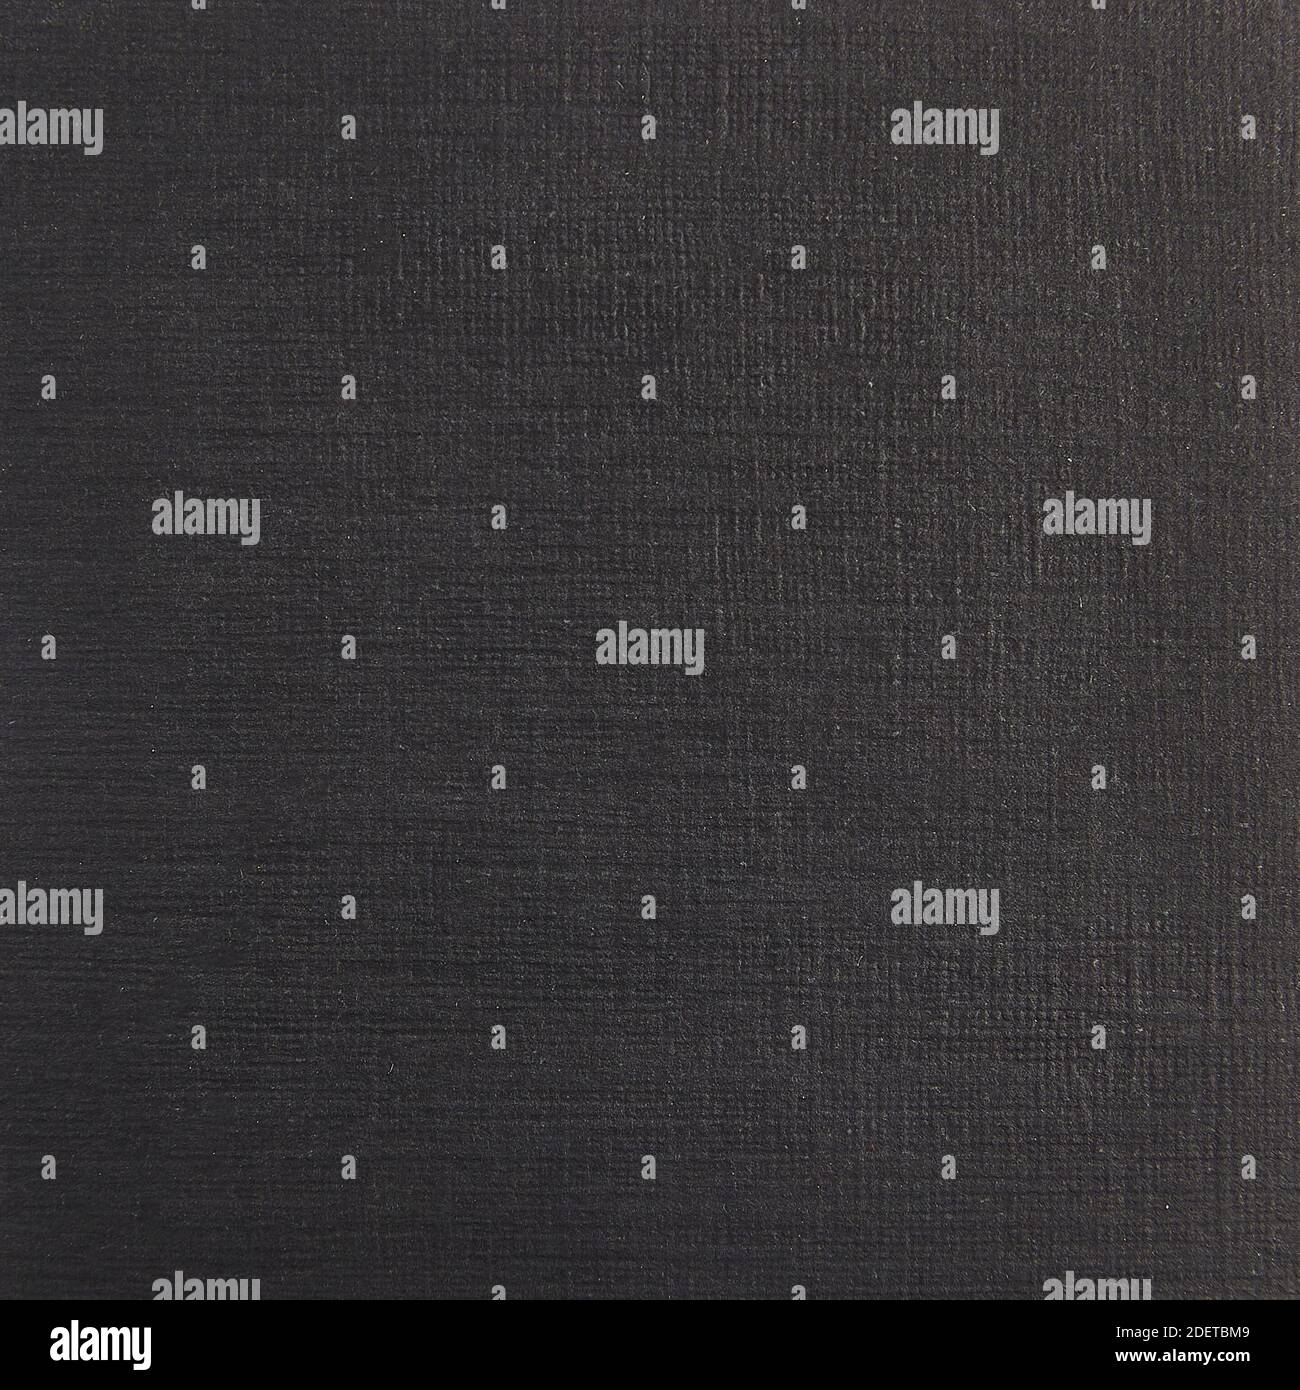 Paper texture background dark grey color for decor Stock Photo - Alamy